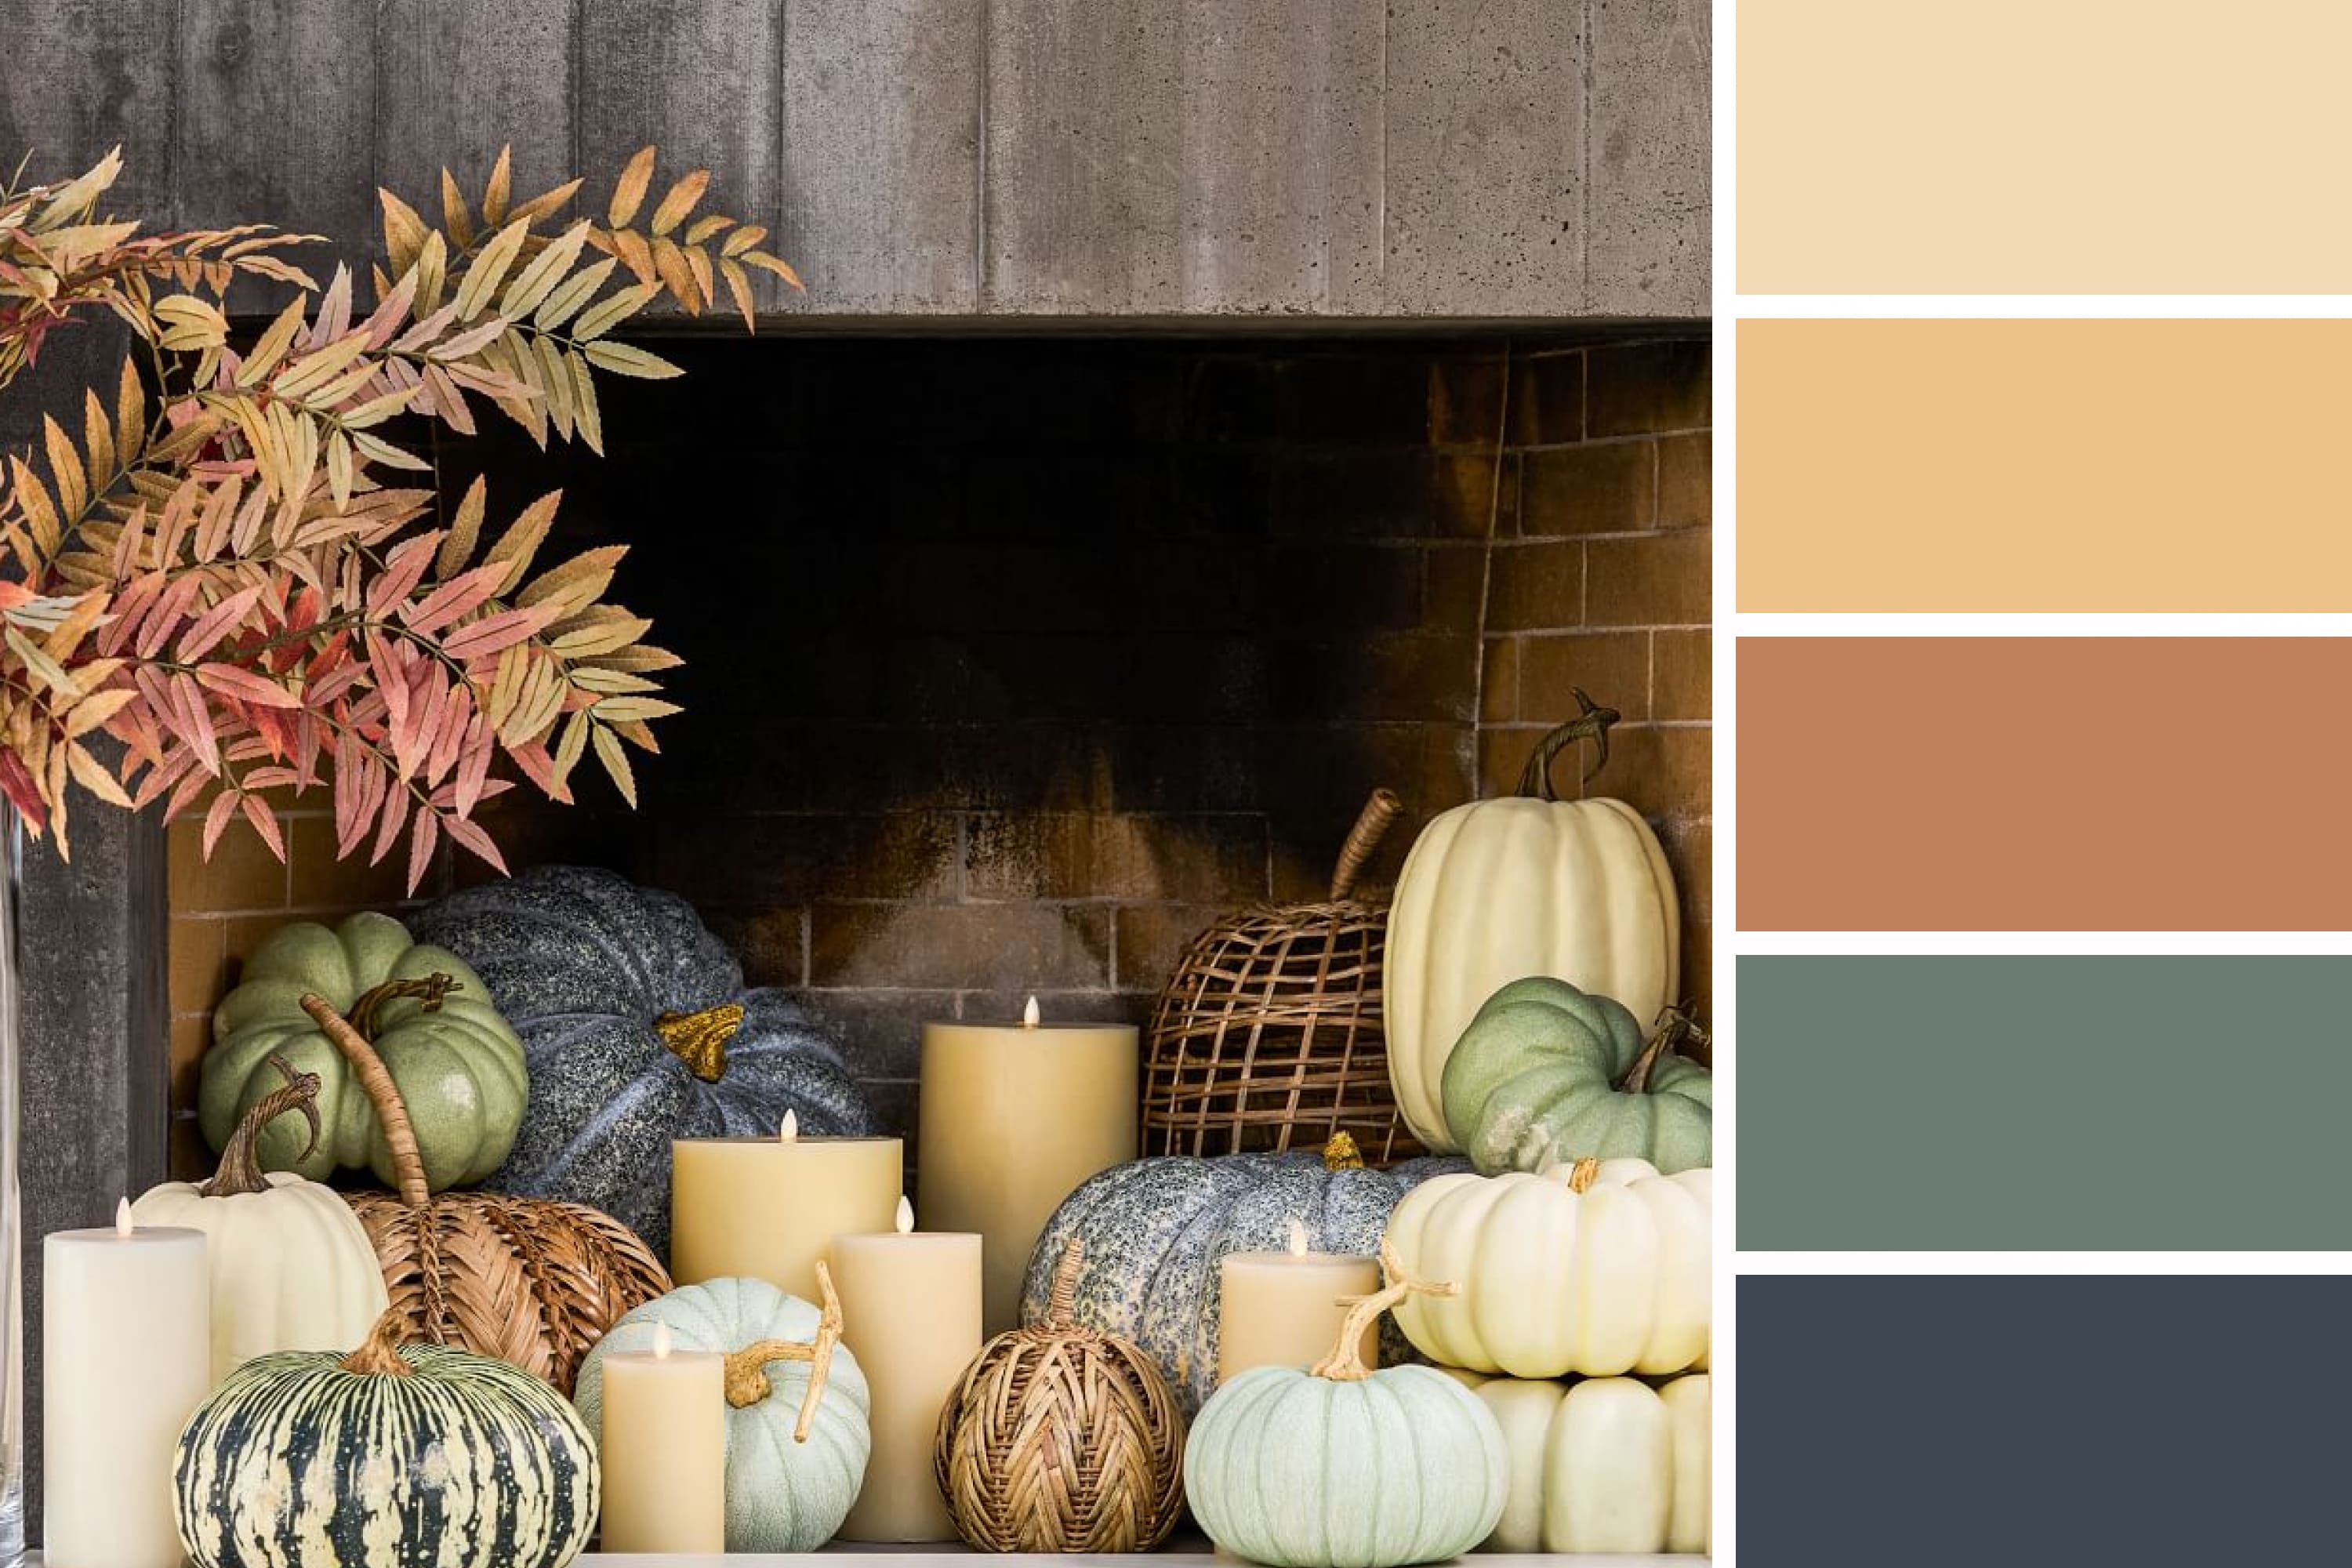 Photo of a fireplace in which there are different colors and size of pumpkin, candles, wicker baskets.